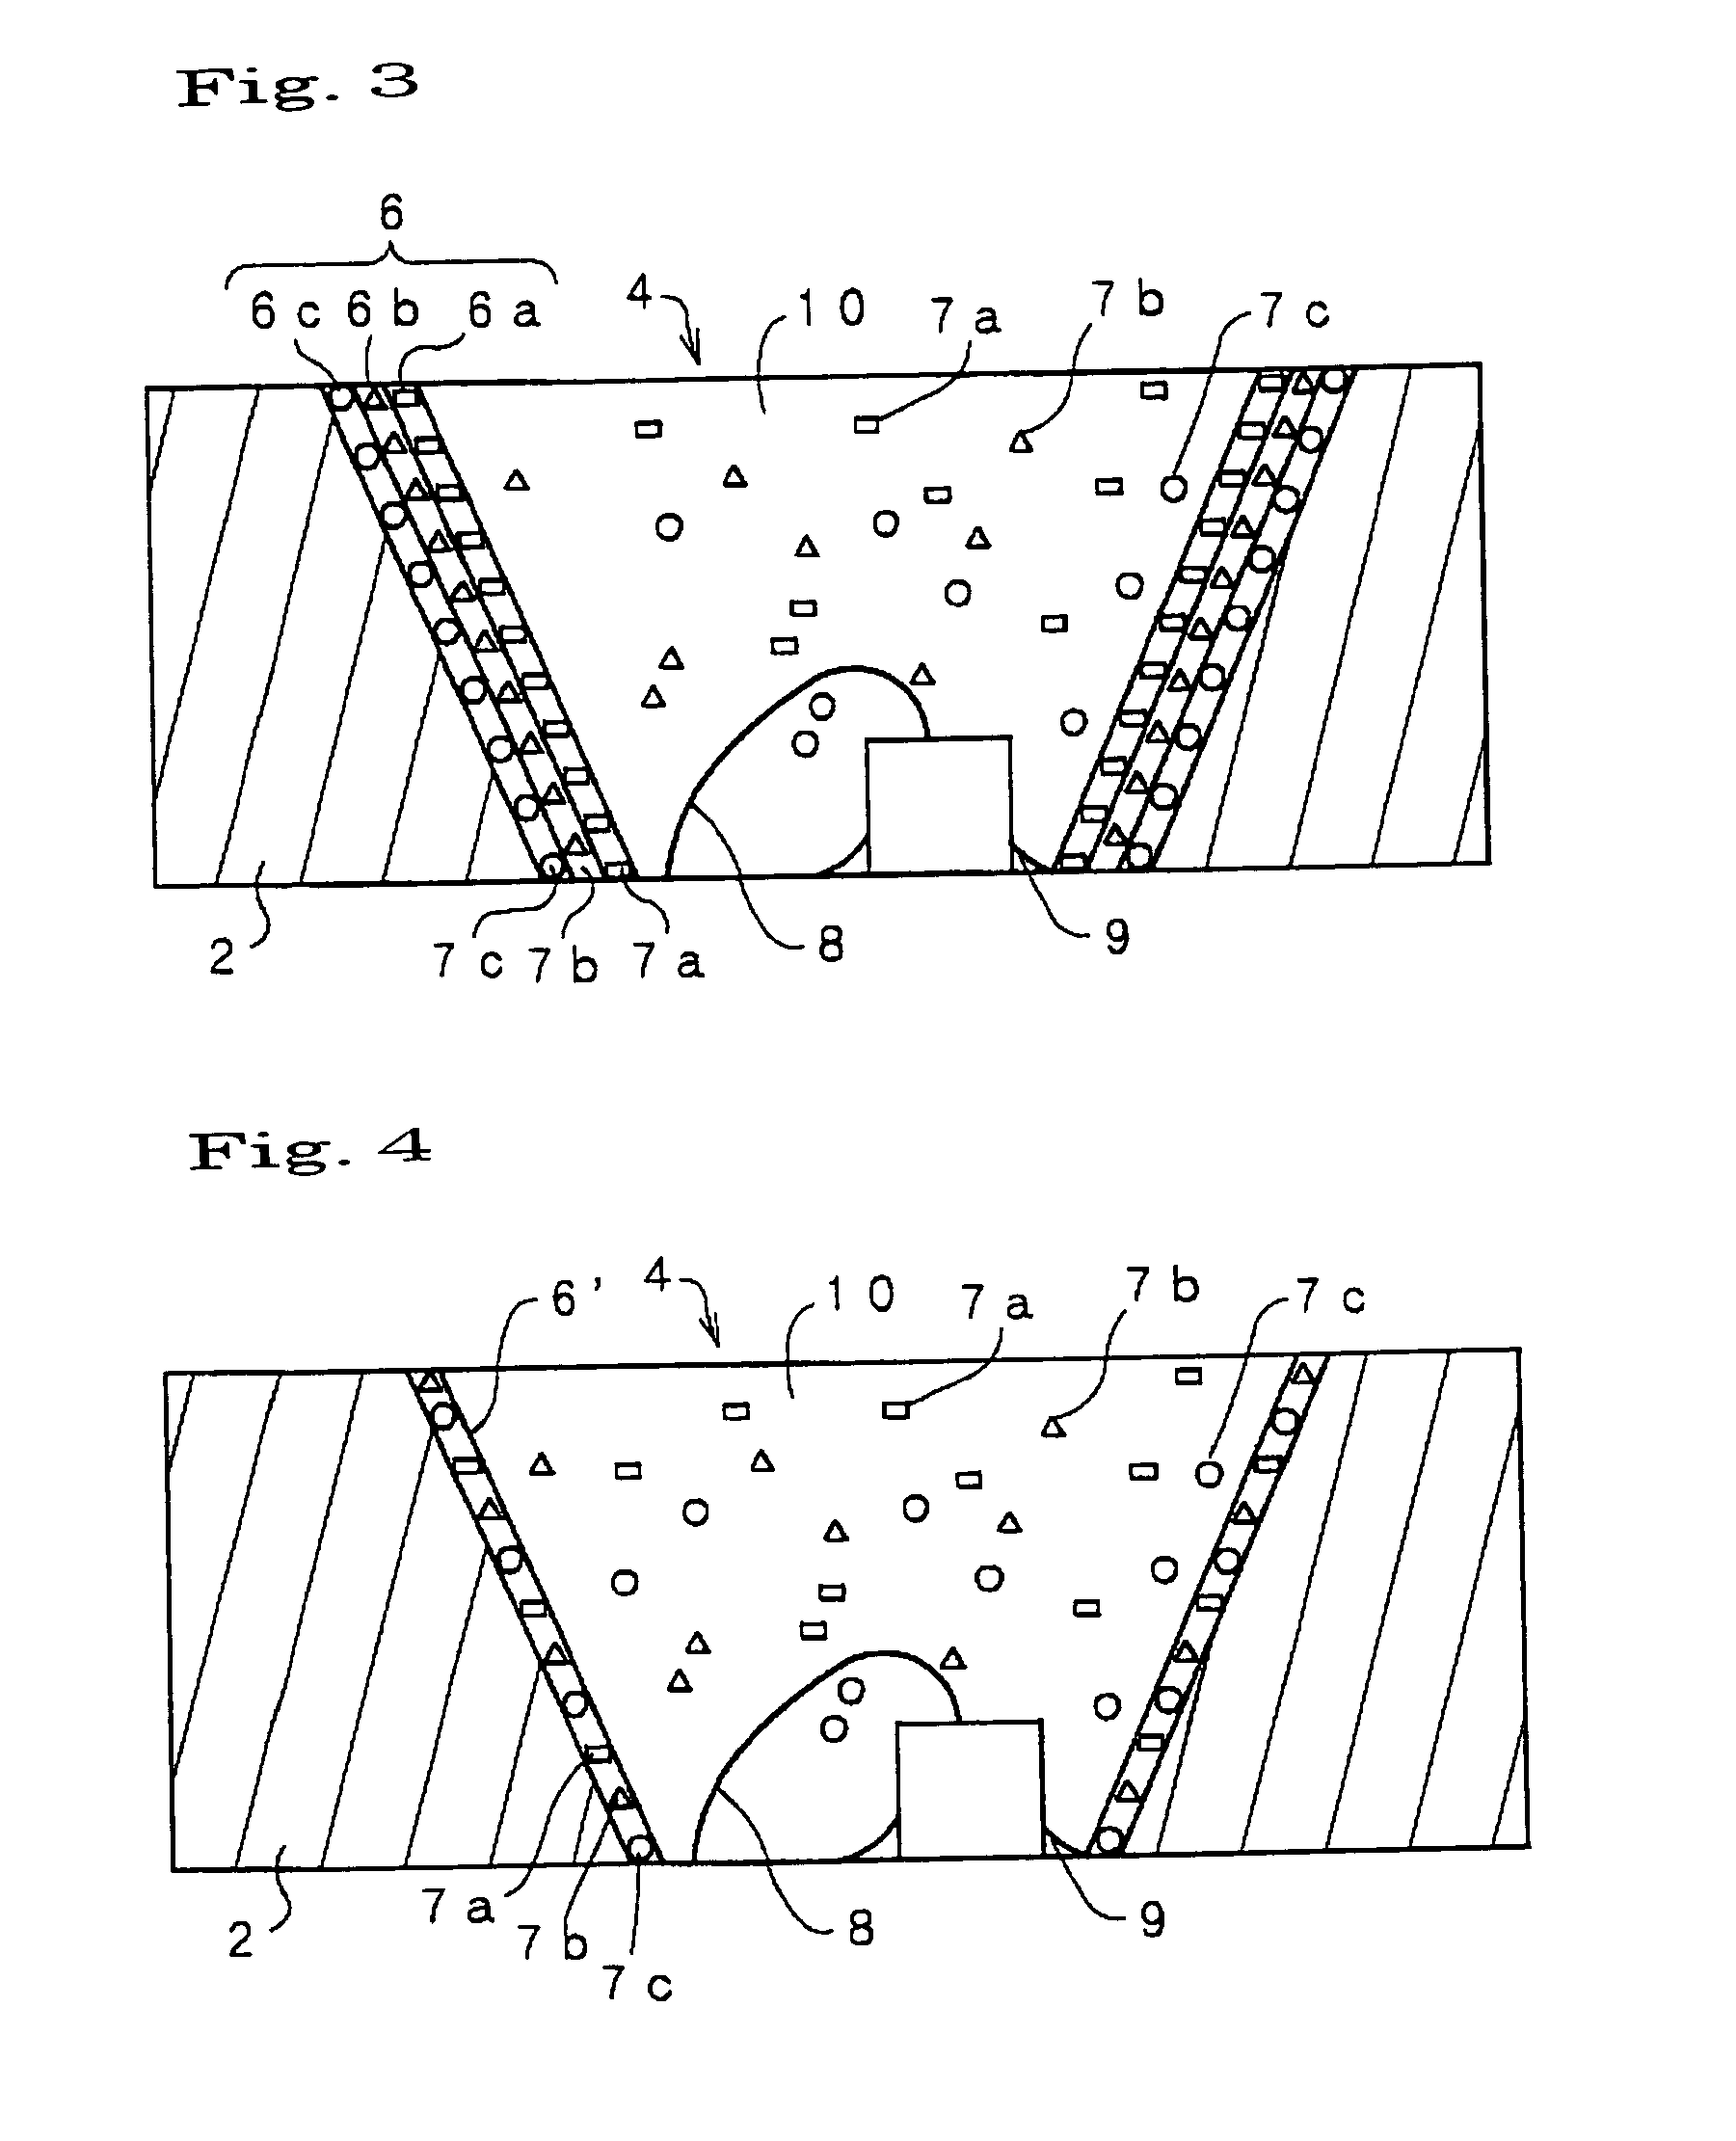 LED device including phosphor layers on the reflecting surface